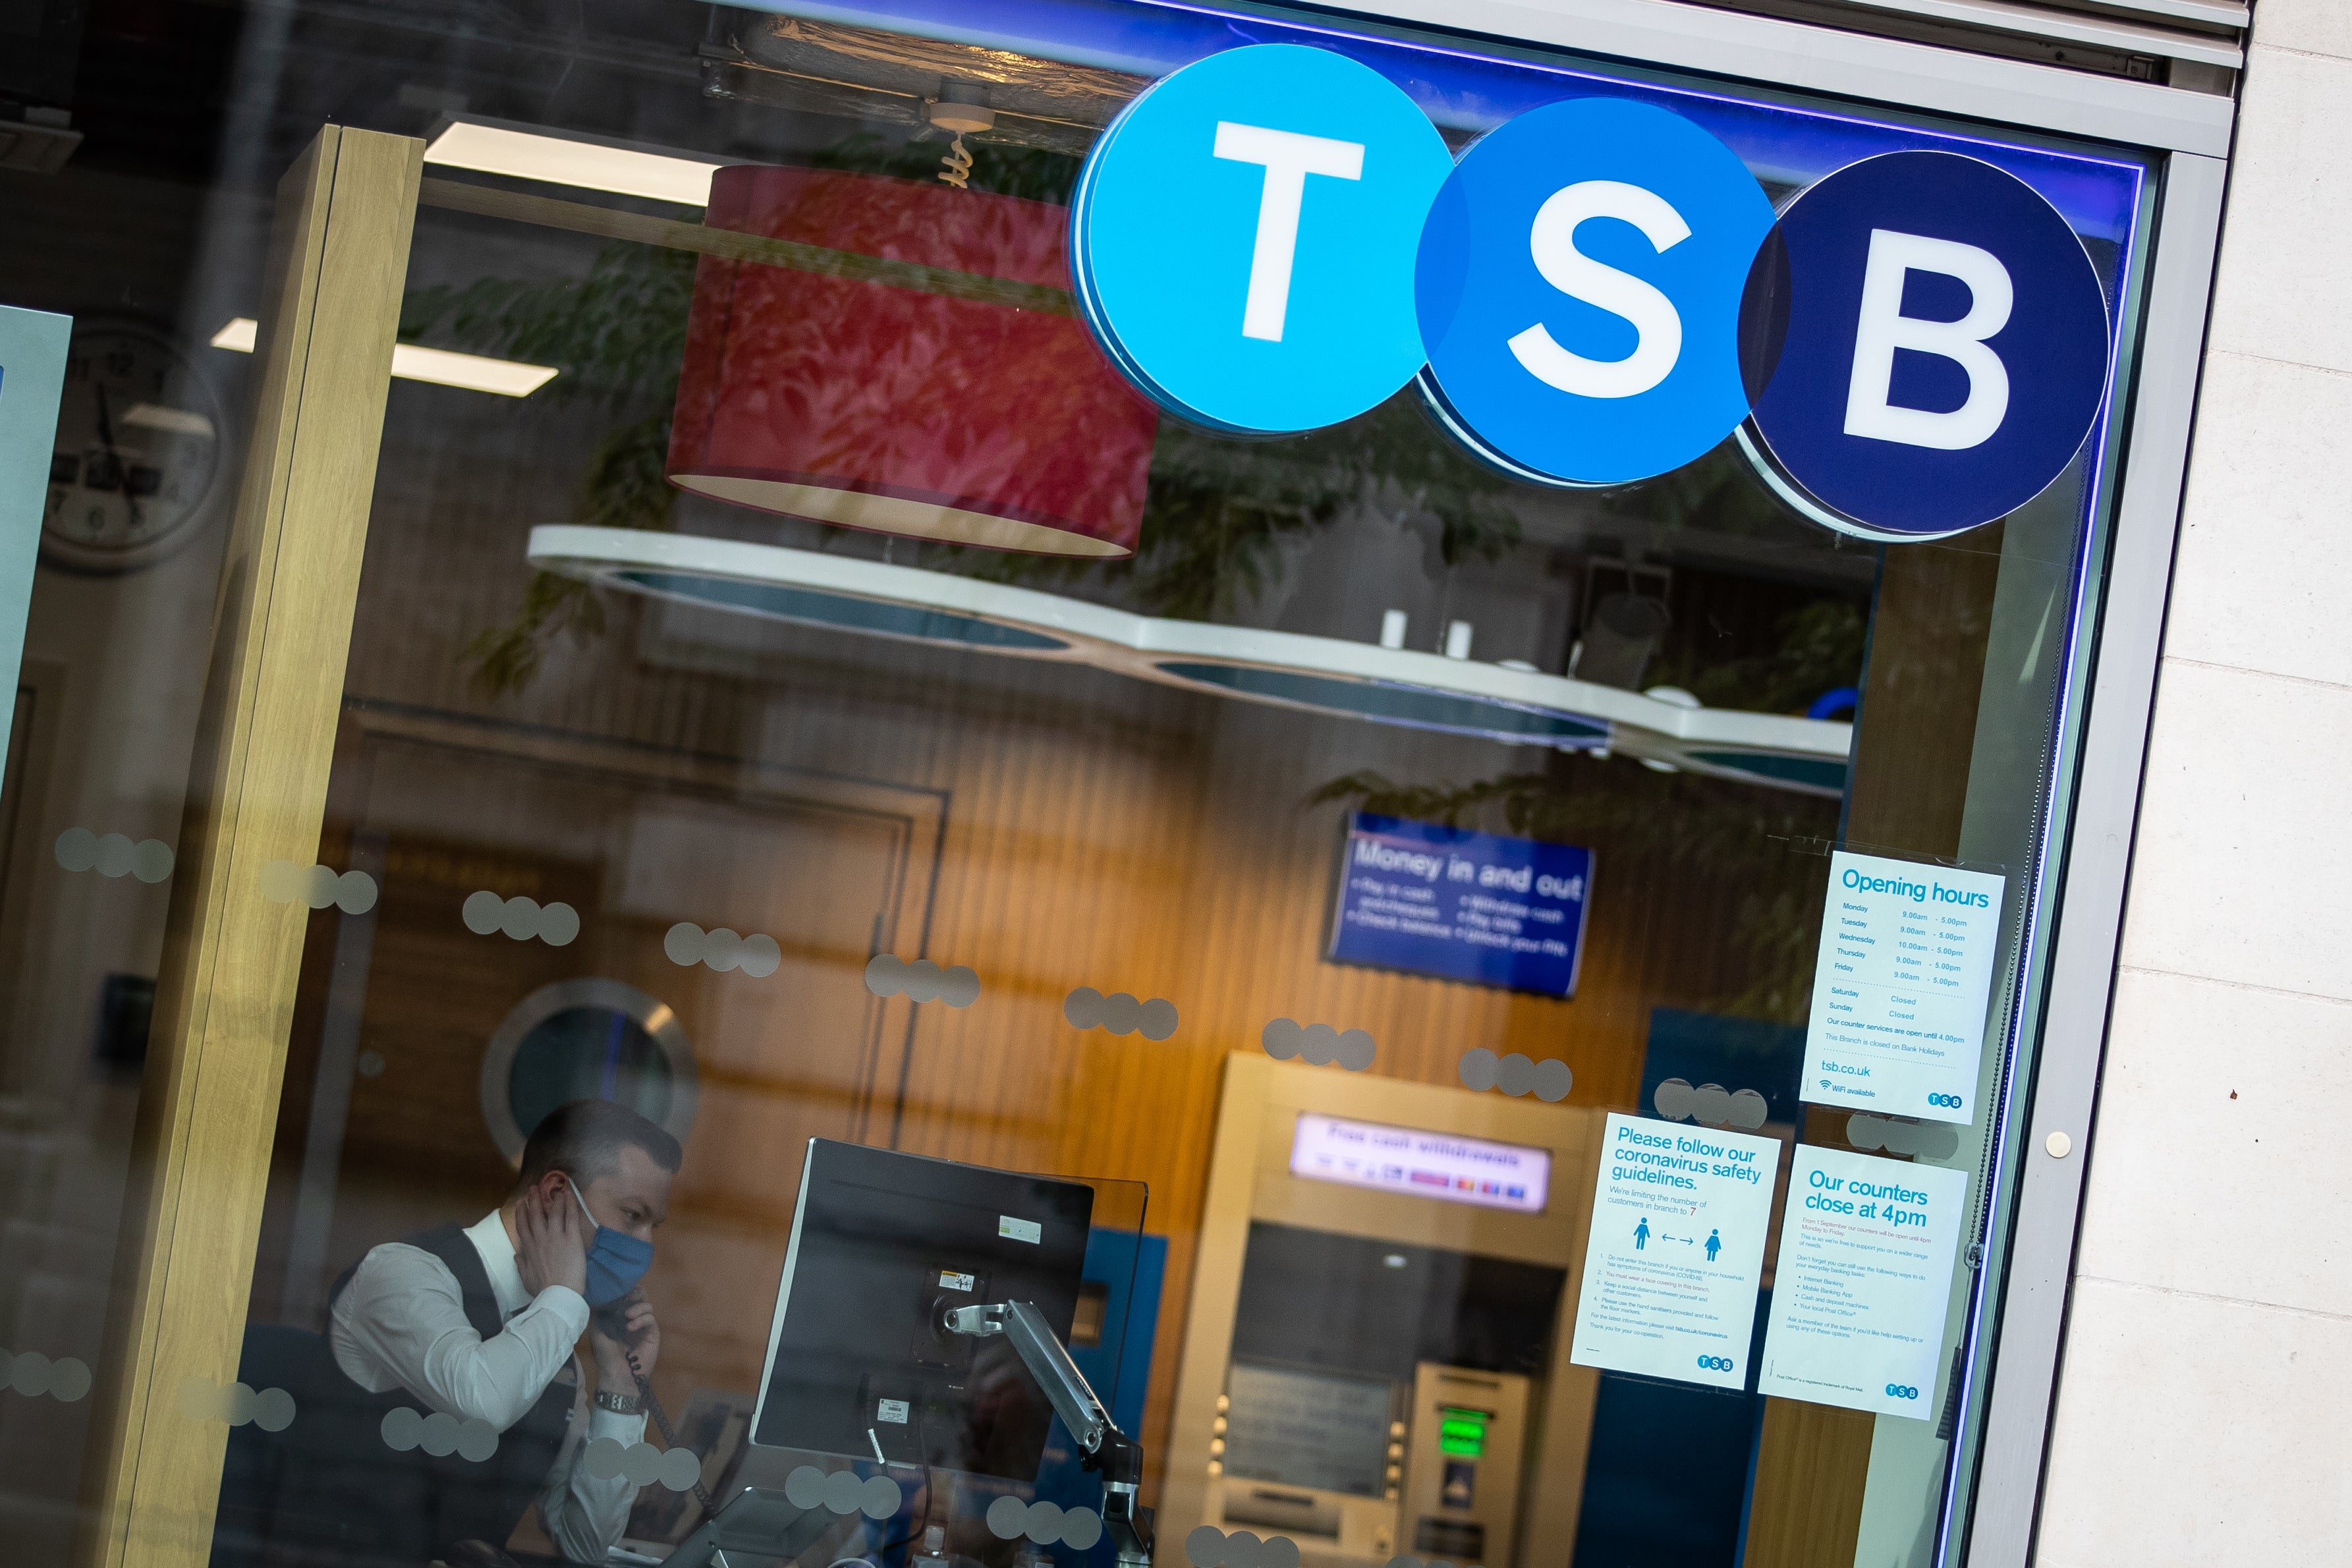 TSB was the first bank to start reimbursing customers who fell victim to fraud before the practice became mandatory across the industry